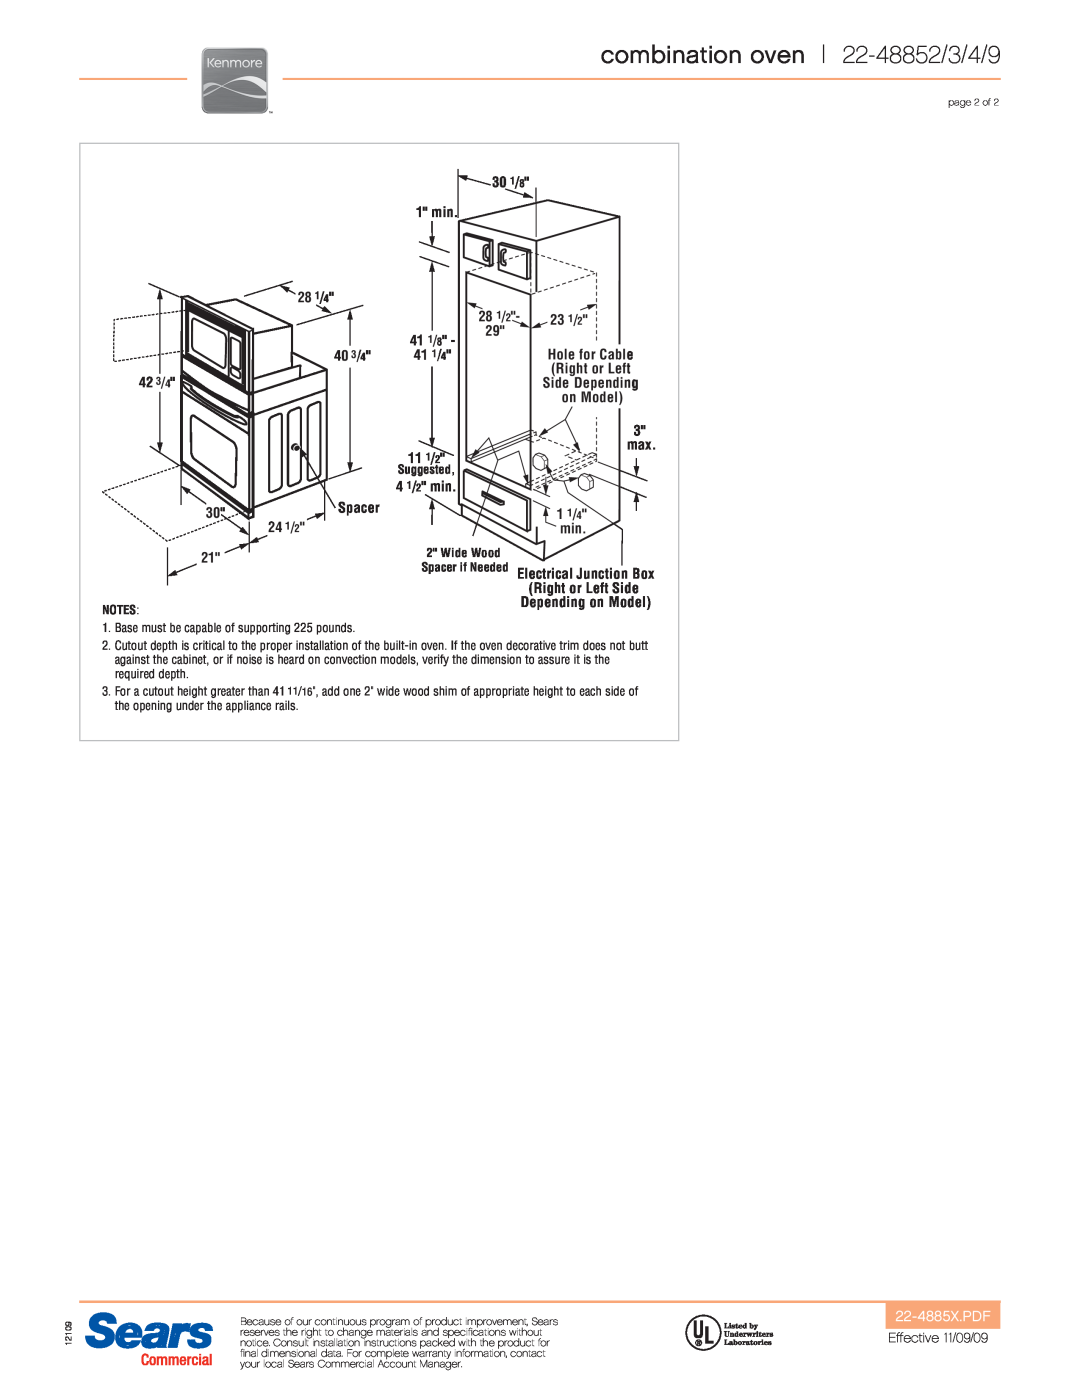 Kenmore 22-48834, 22-48839 combination oven 22-48852/3/4/9, 22-4885X.PDF, Spacer if Needed Electrical Junction Box 